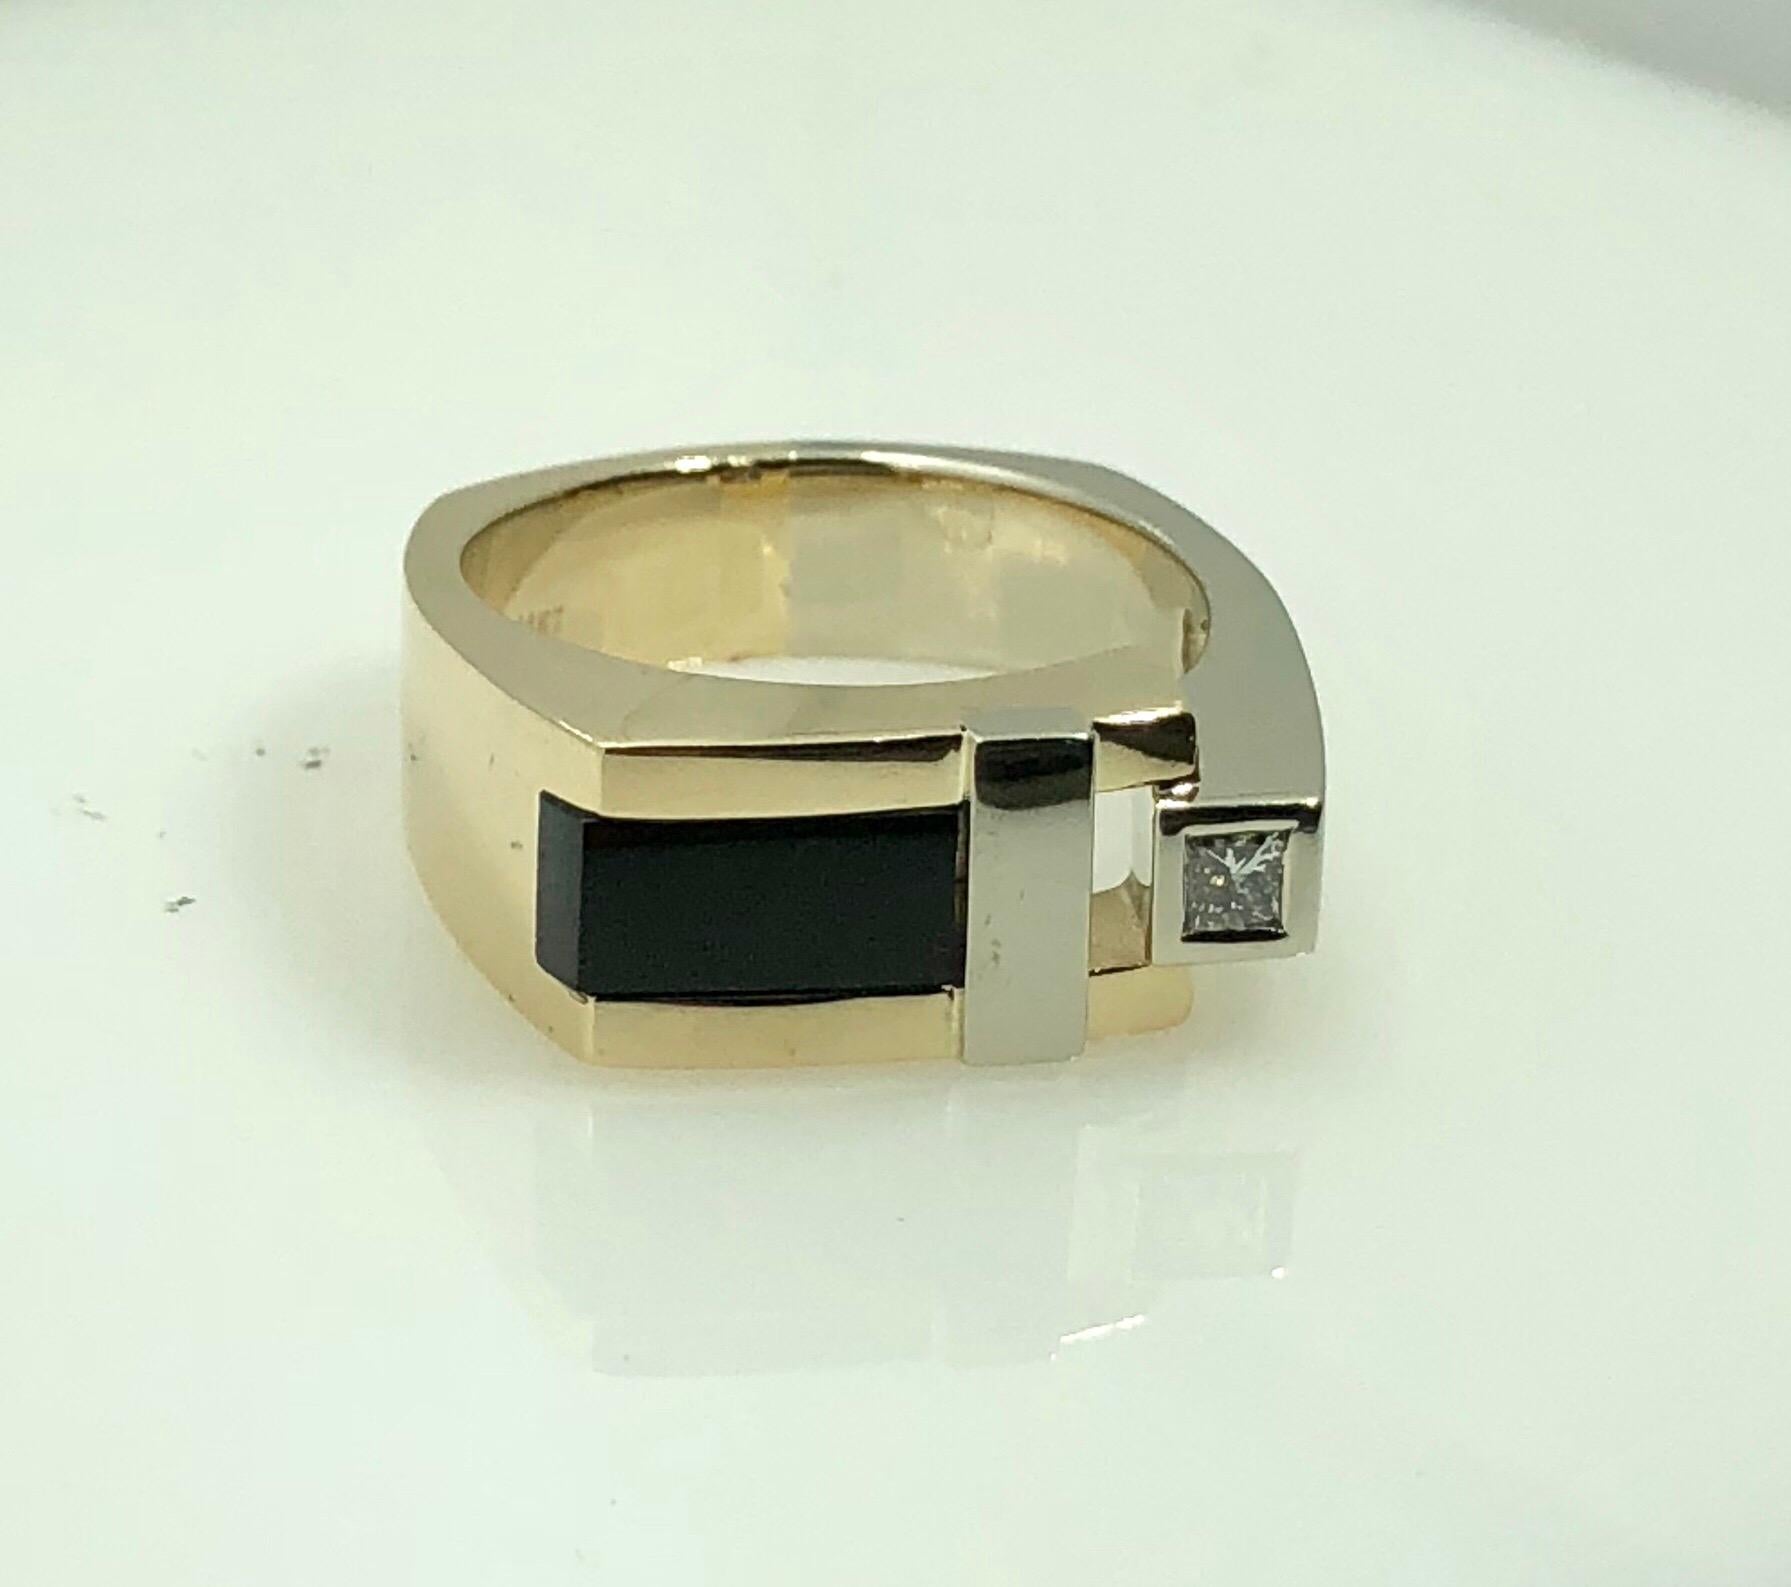 Aurum 14 Karat Two Tone Diamond and Onyx Contemporary Ring. This piece is technically a Mens ring but would be stunning as a womens piece as well. Original Aurum  creation, created in 14 karat yellow and white gold, weight 14.3 grams. Adorned with